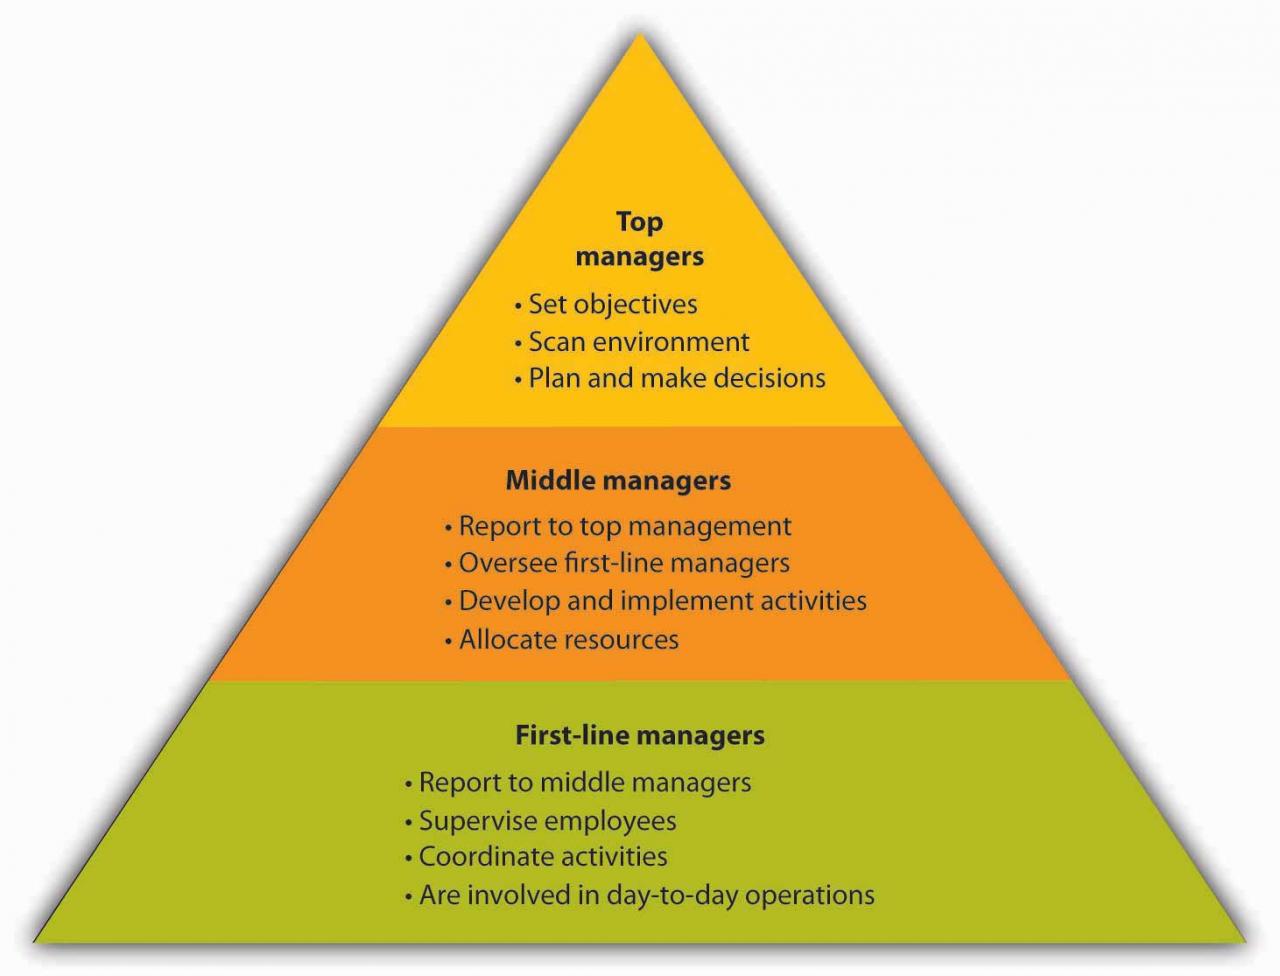 3 levels of managers in an organization